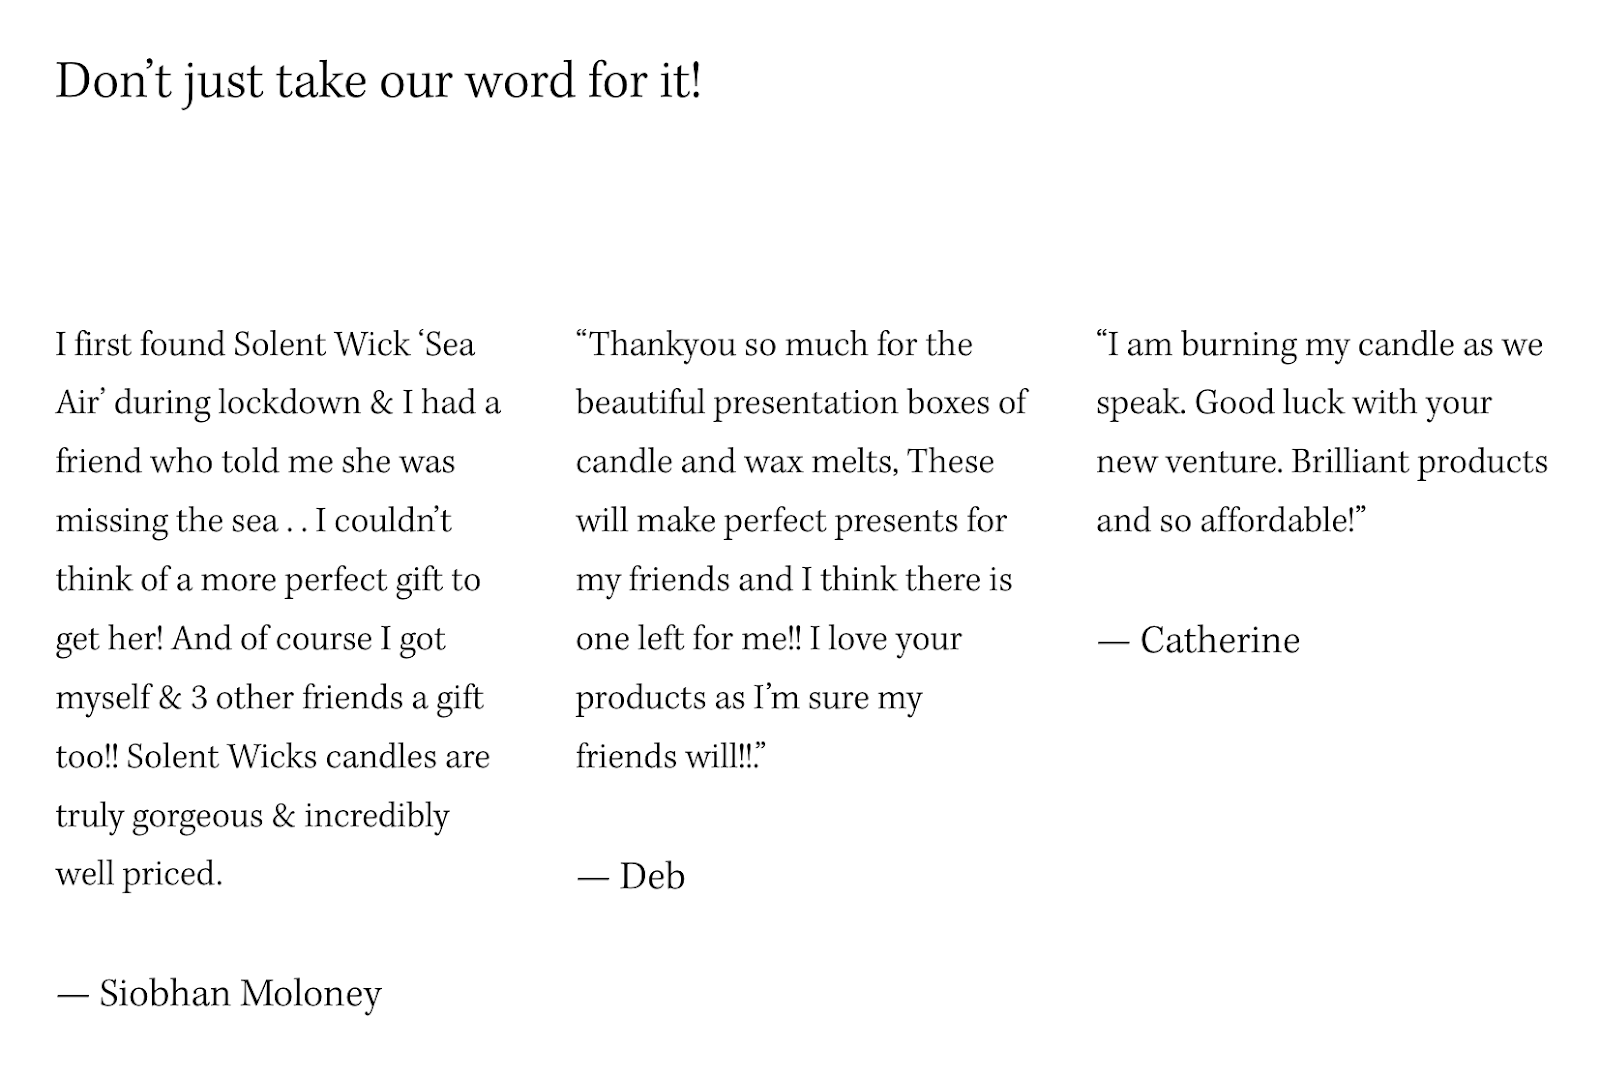 an example of a page from U.K. candle maker Solent Wick ،led "Don’t just take our word for it!"